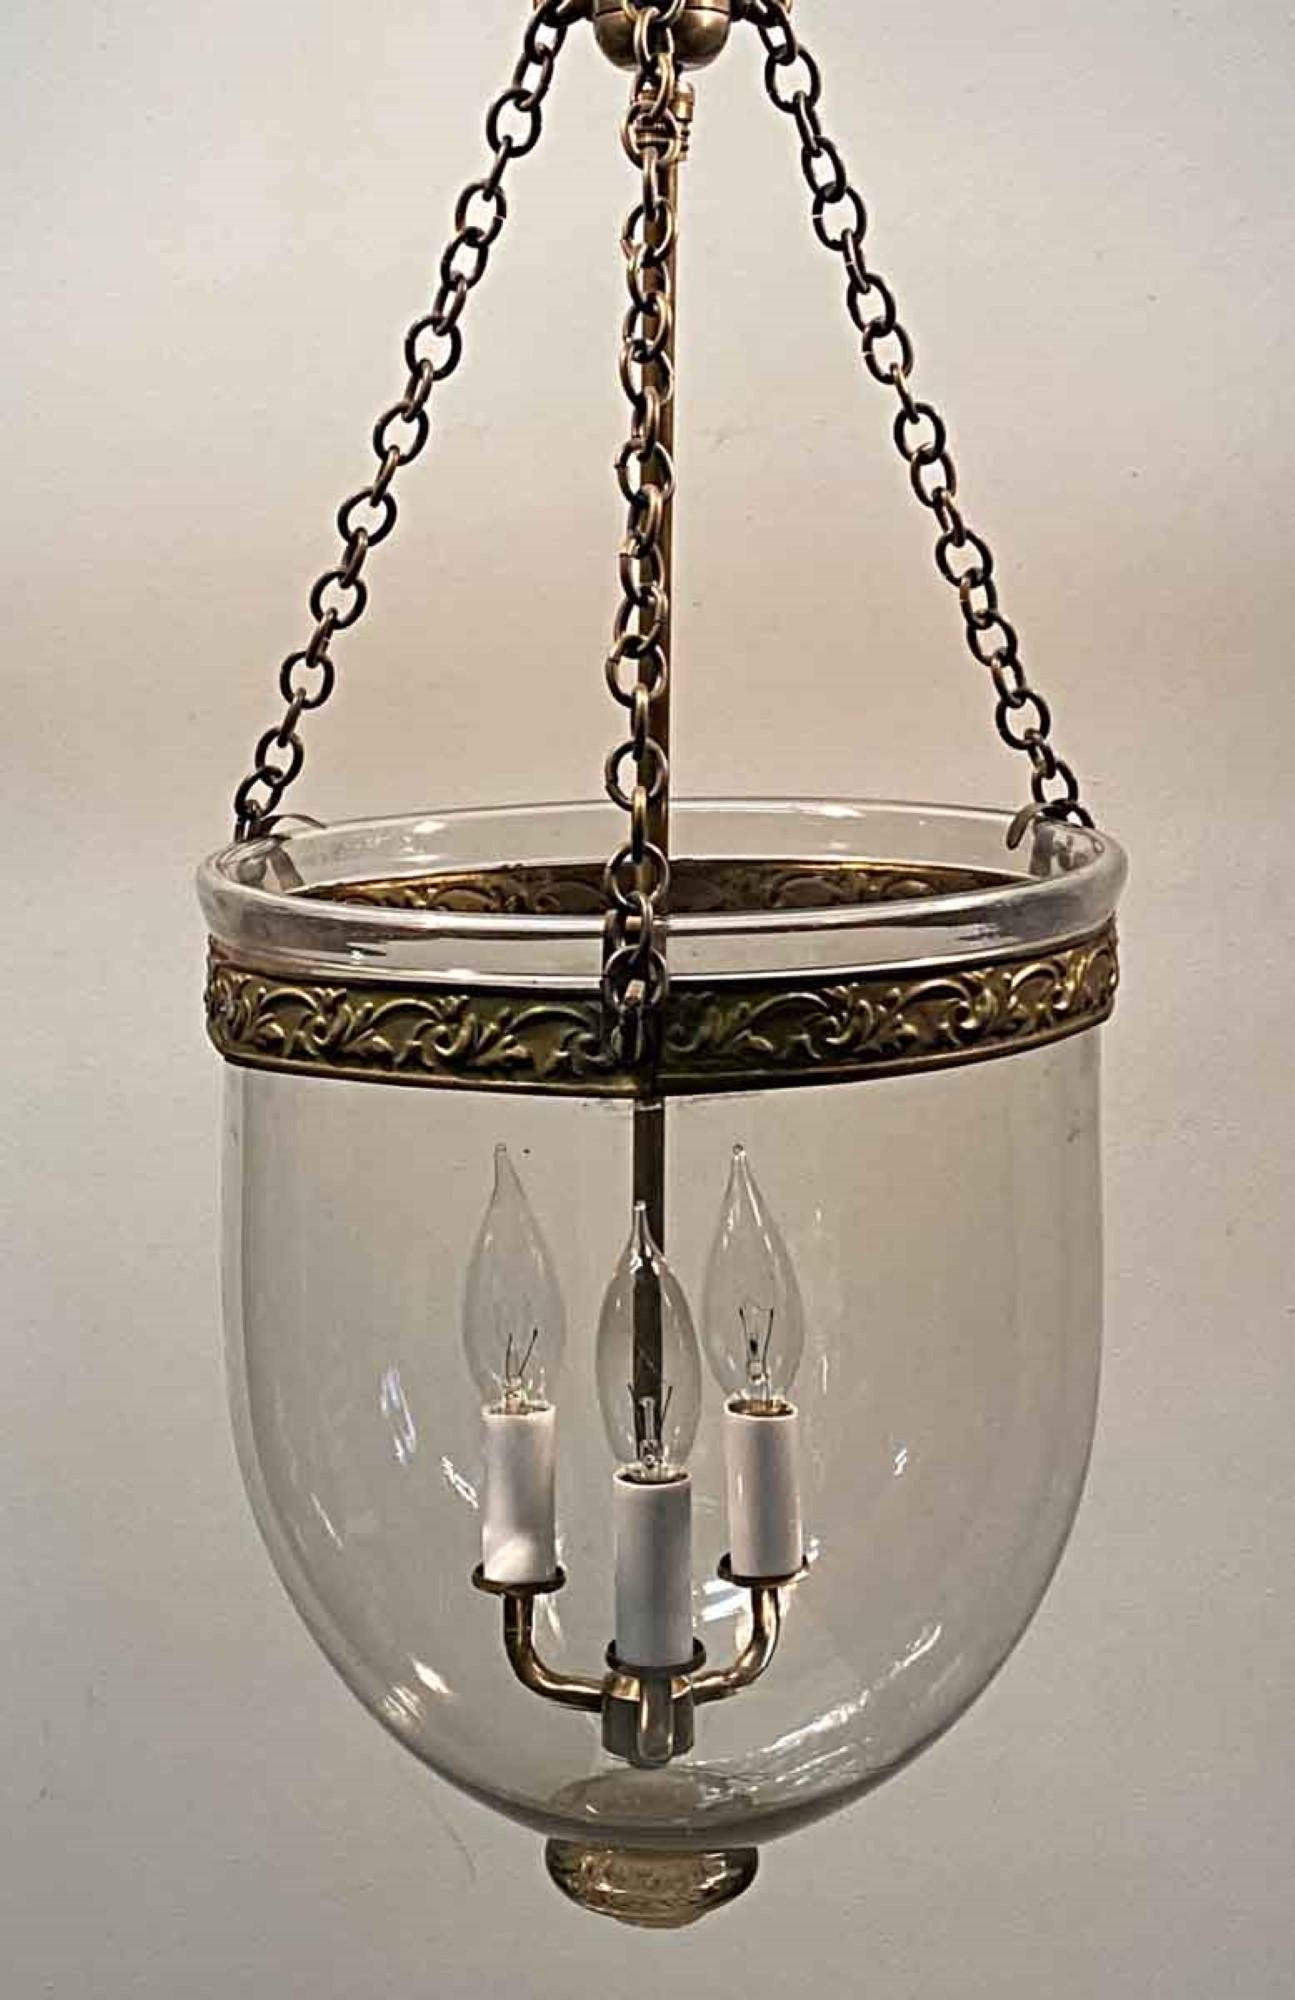 1890s English hand blown glass bell jar oil lantern with clear glass. Now electrified with brass hardware and three candlestick lights. This can be seen at our 400 Gilligan St location in Scranton. PA.